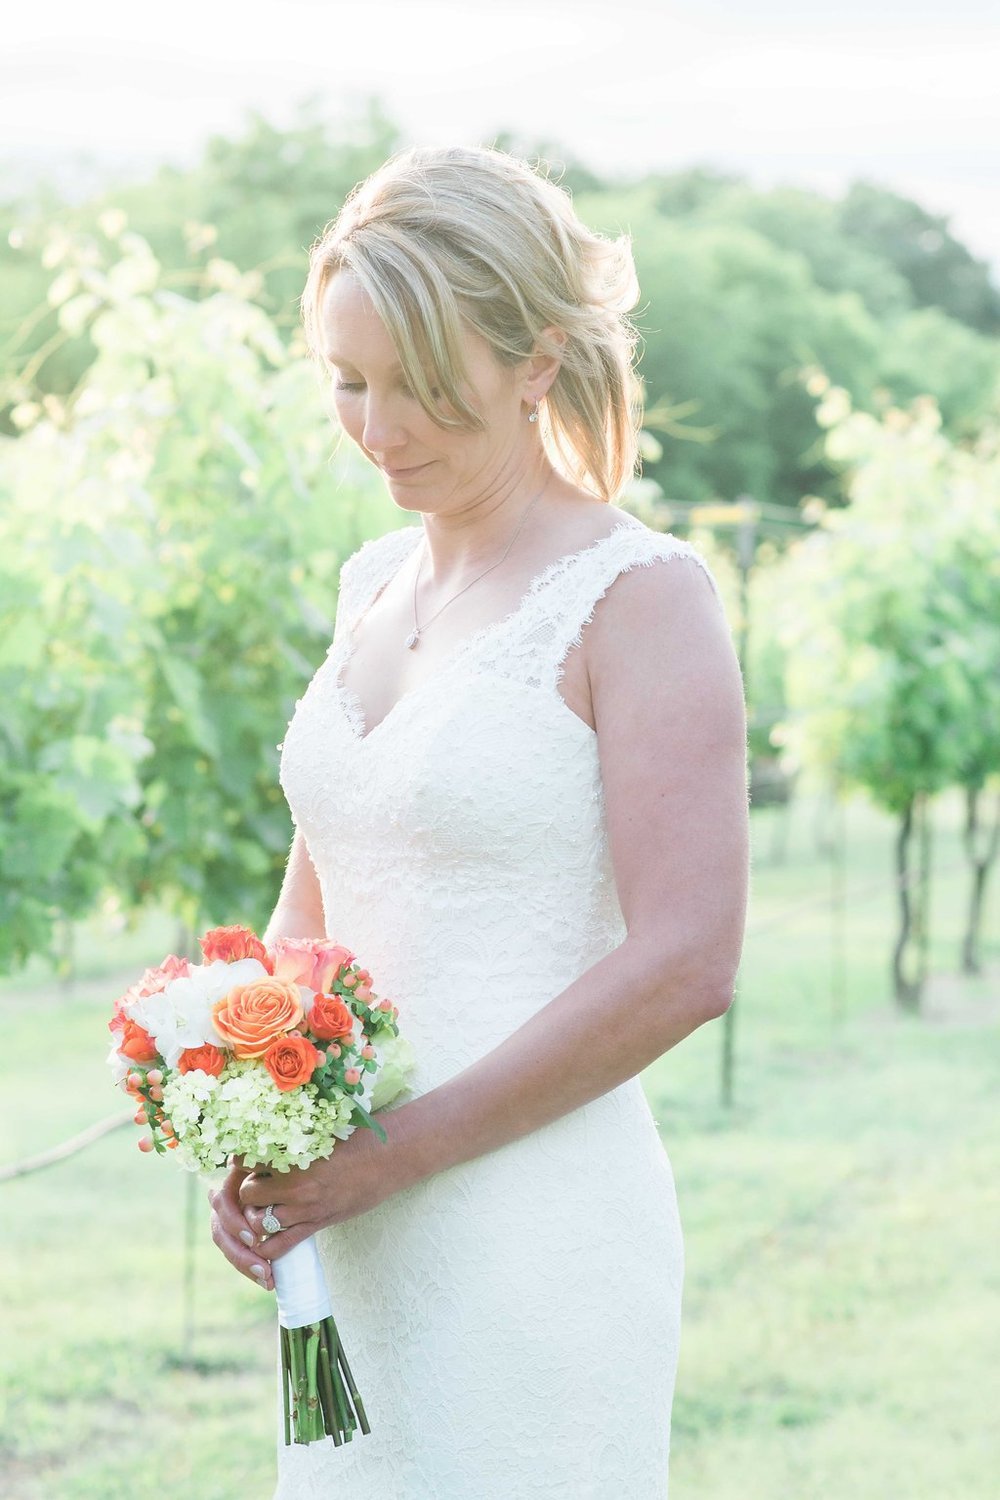 A beautiful bride in a white wedding dress posing for an event photograph in a vineyard.jpg